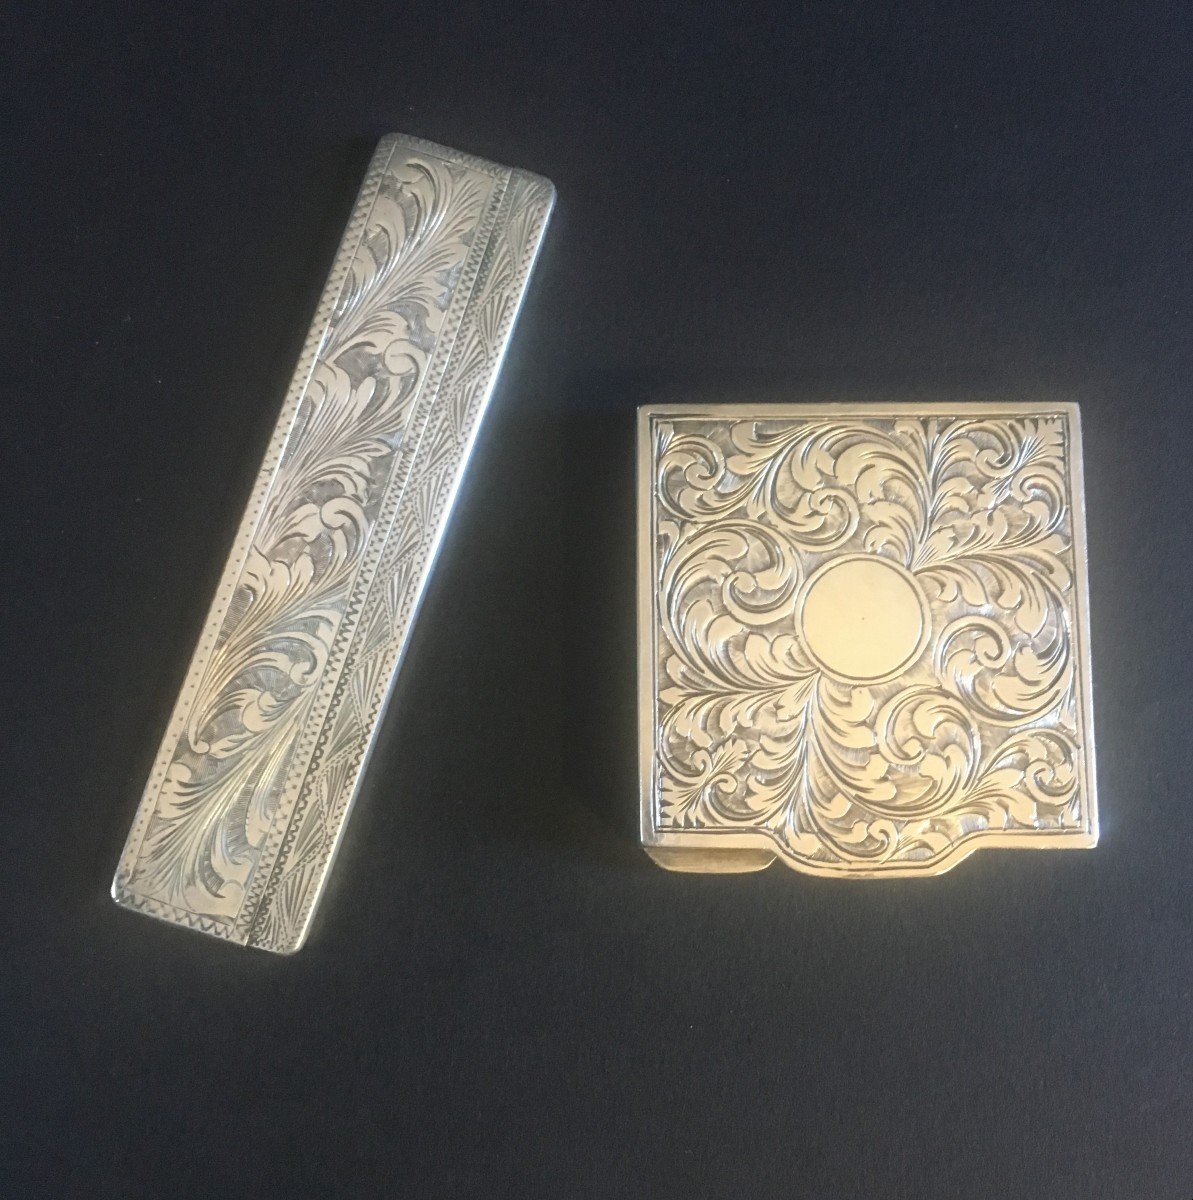  For Lady Bag ; Compact And Comb With His Case In Sterling Silver. XIXth